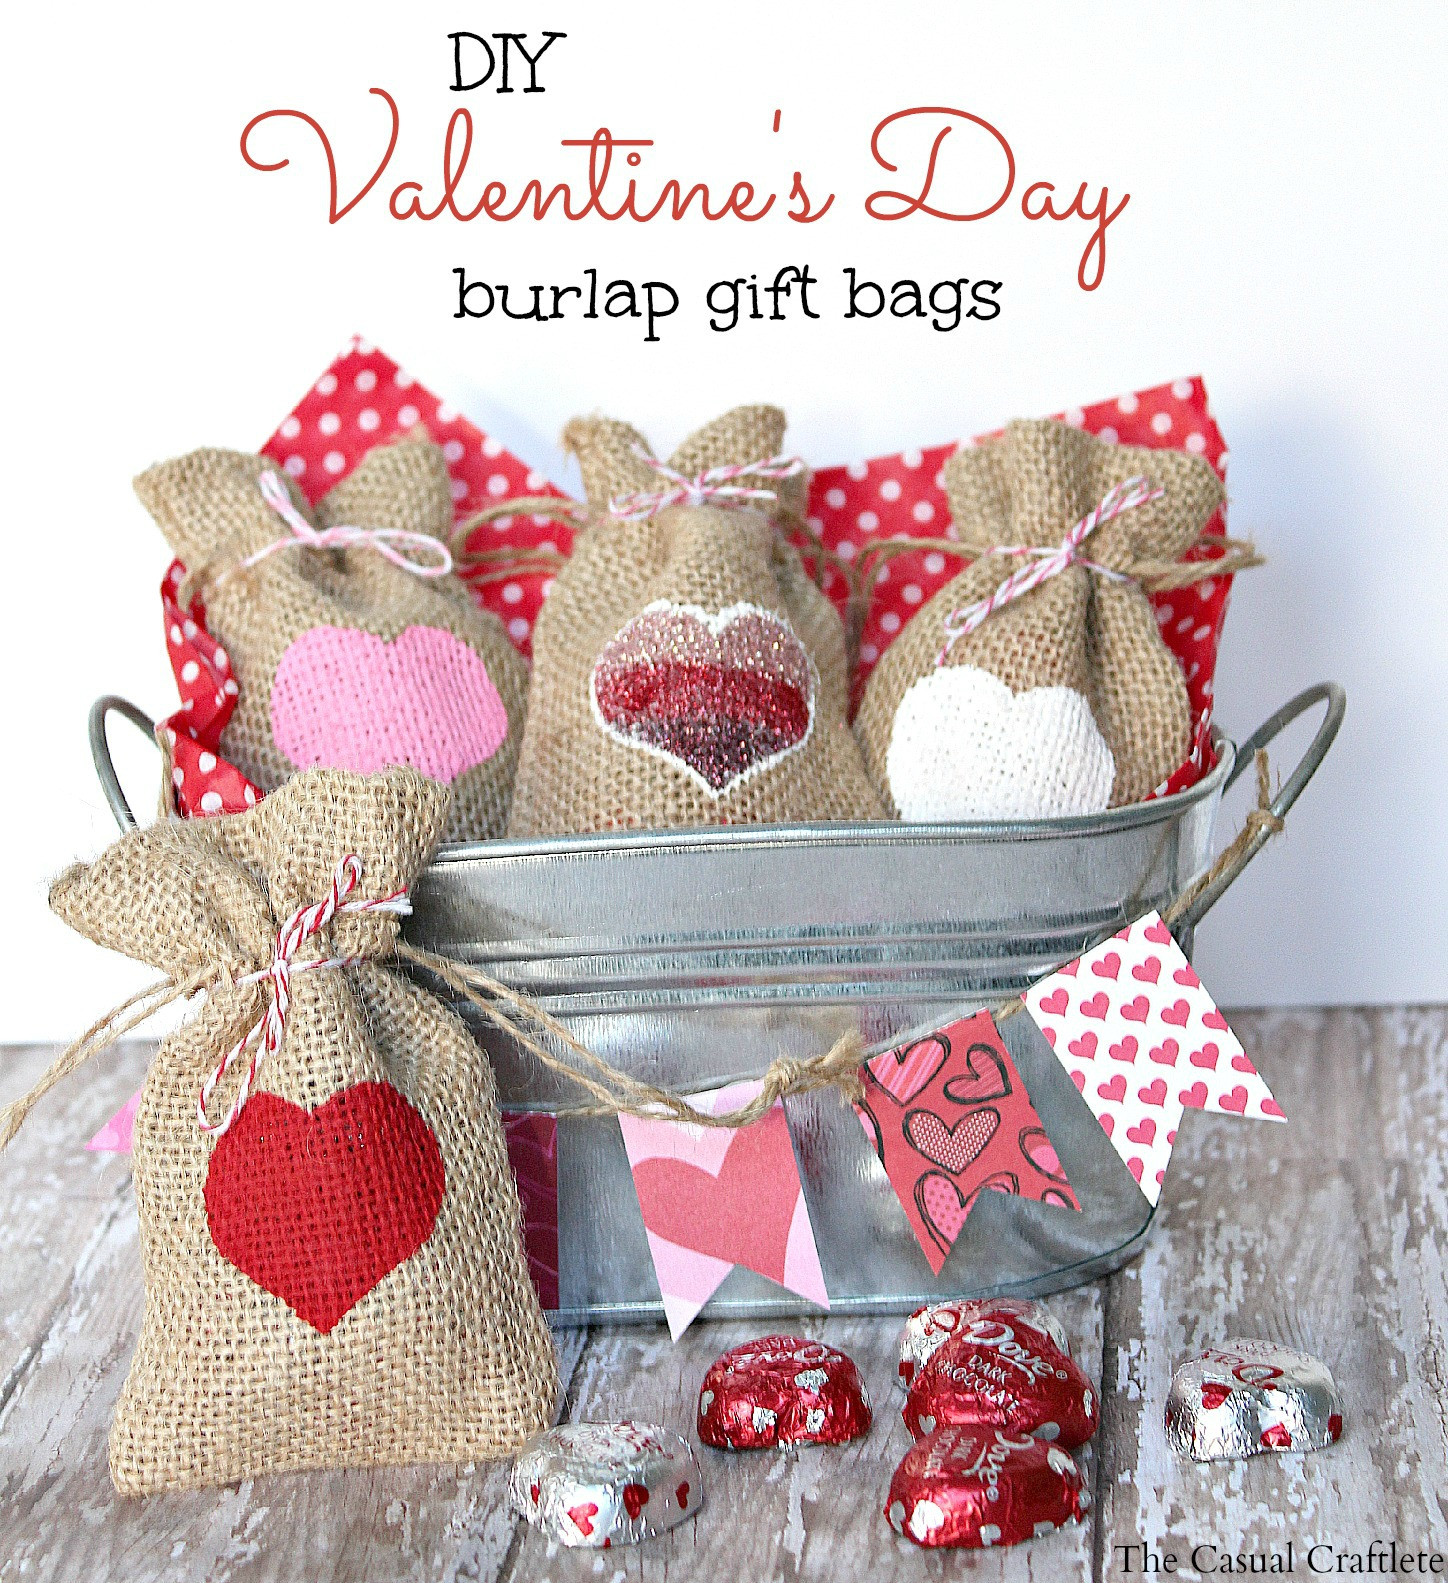 Valentines Day Gifts For Her Ideas
 DIY Valentine s Day Burlap Gift Bags